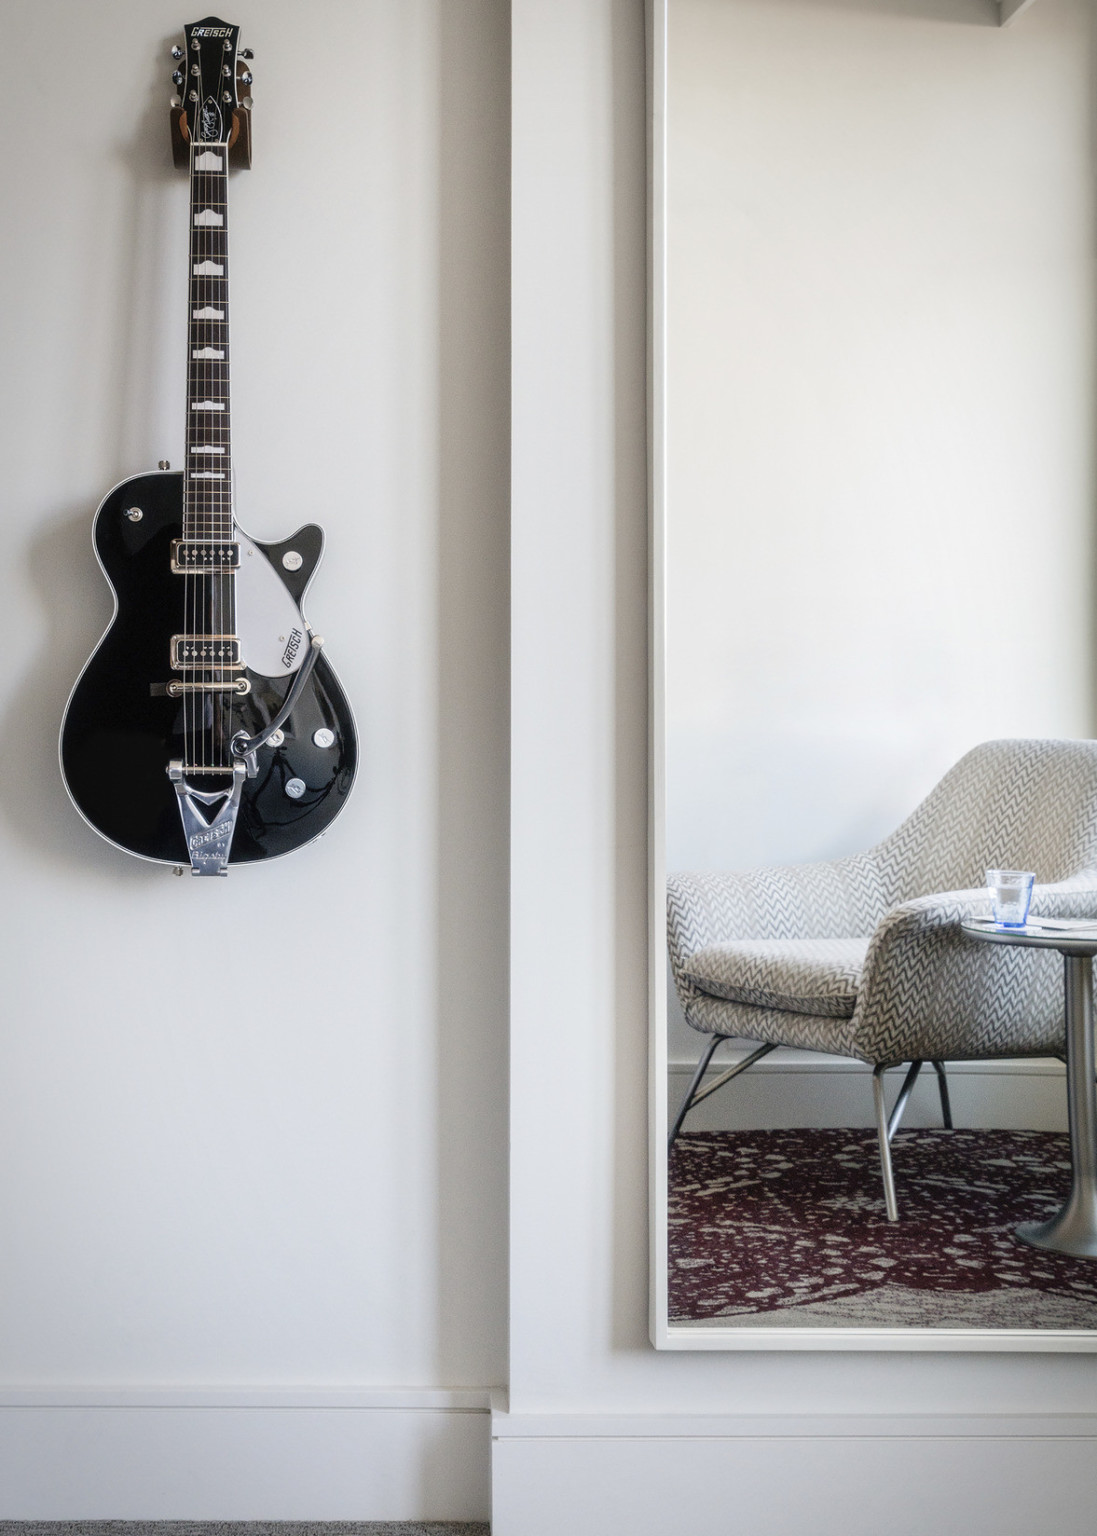 White room with black and white guitar hanging on wall next to mirror reflecting white textural upholstered chair on red rug